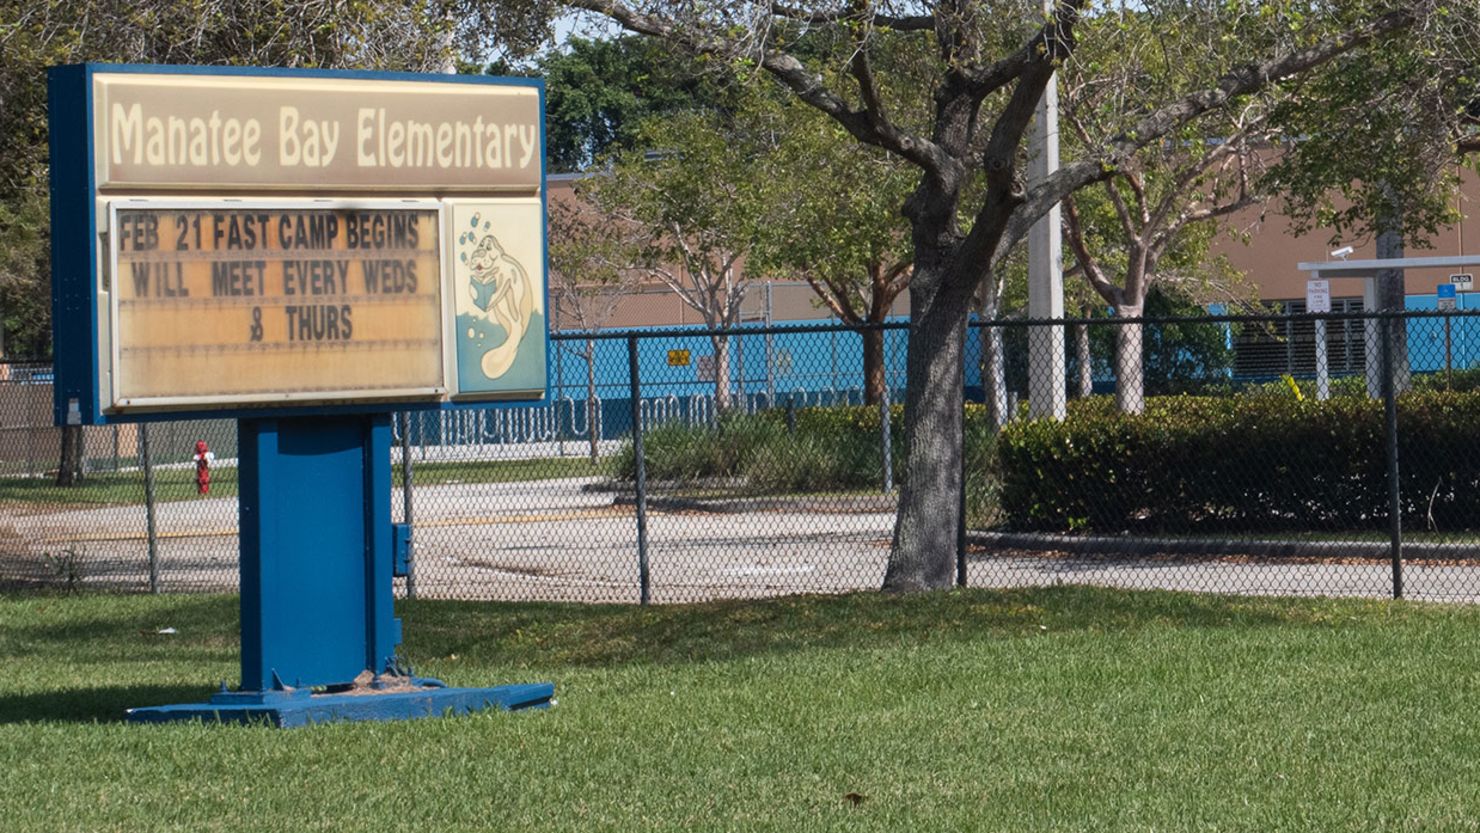 Seven measles cases are linked to Manatee Bay Elementary in Weston, Florida. Two additional cases have been reported Broward County in children younger than four.